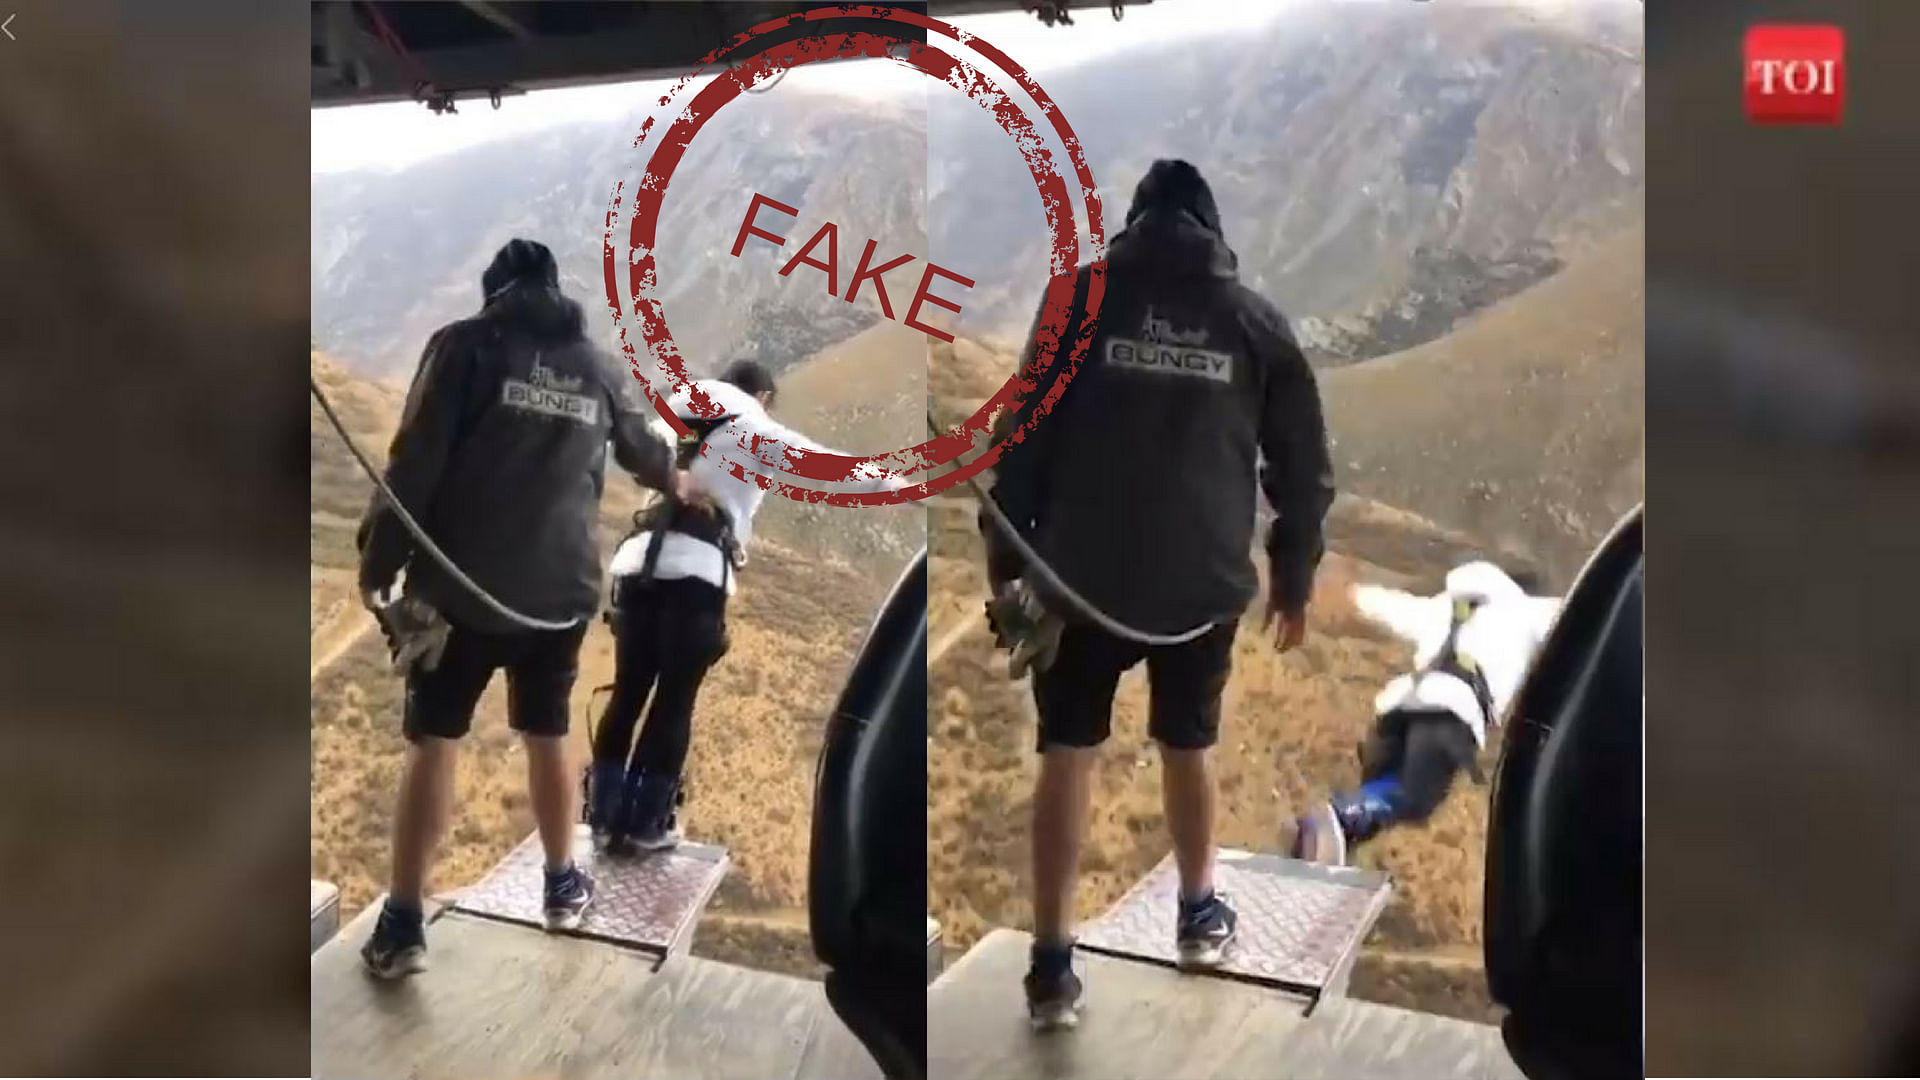 The video of a girl bungee-jumping without a rope is fake.